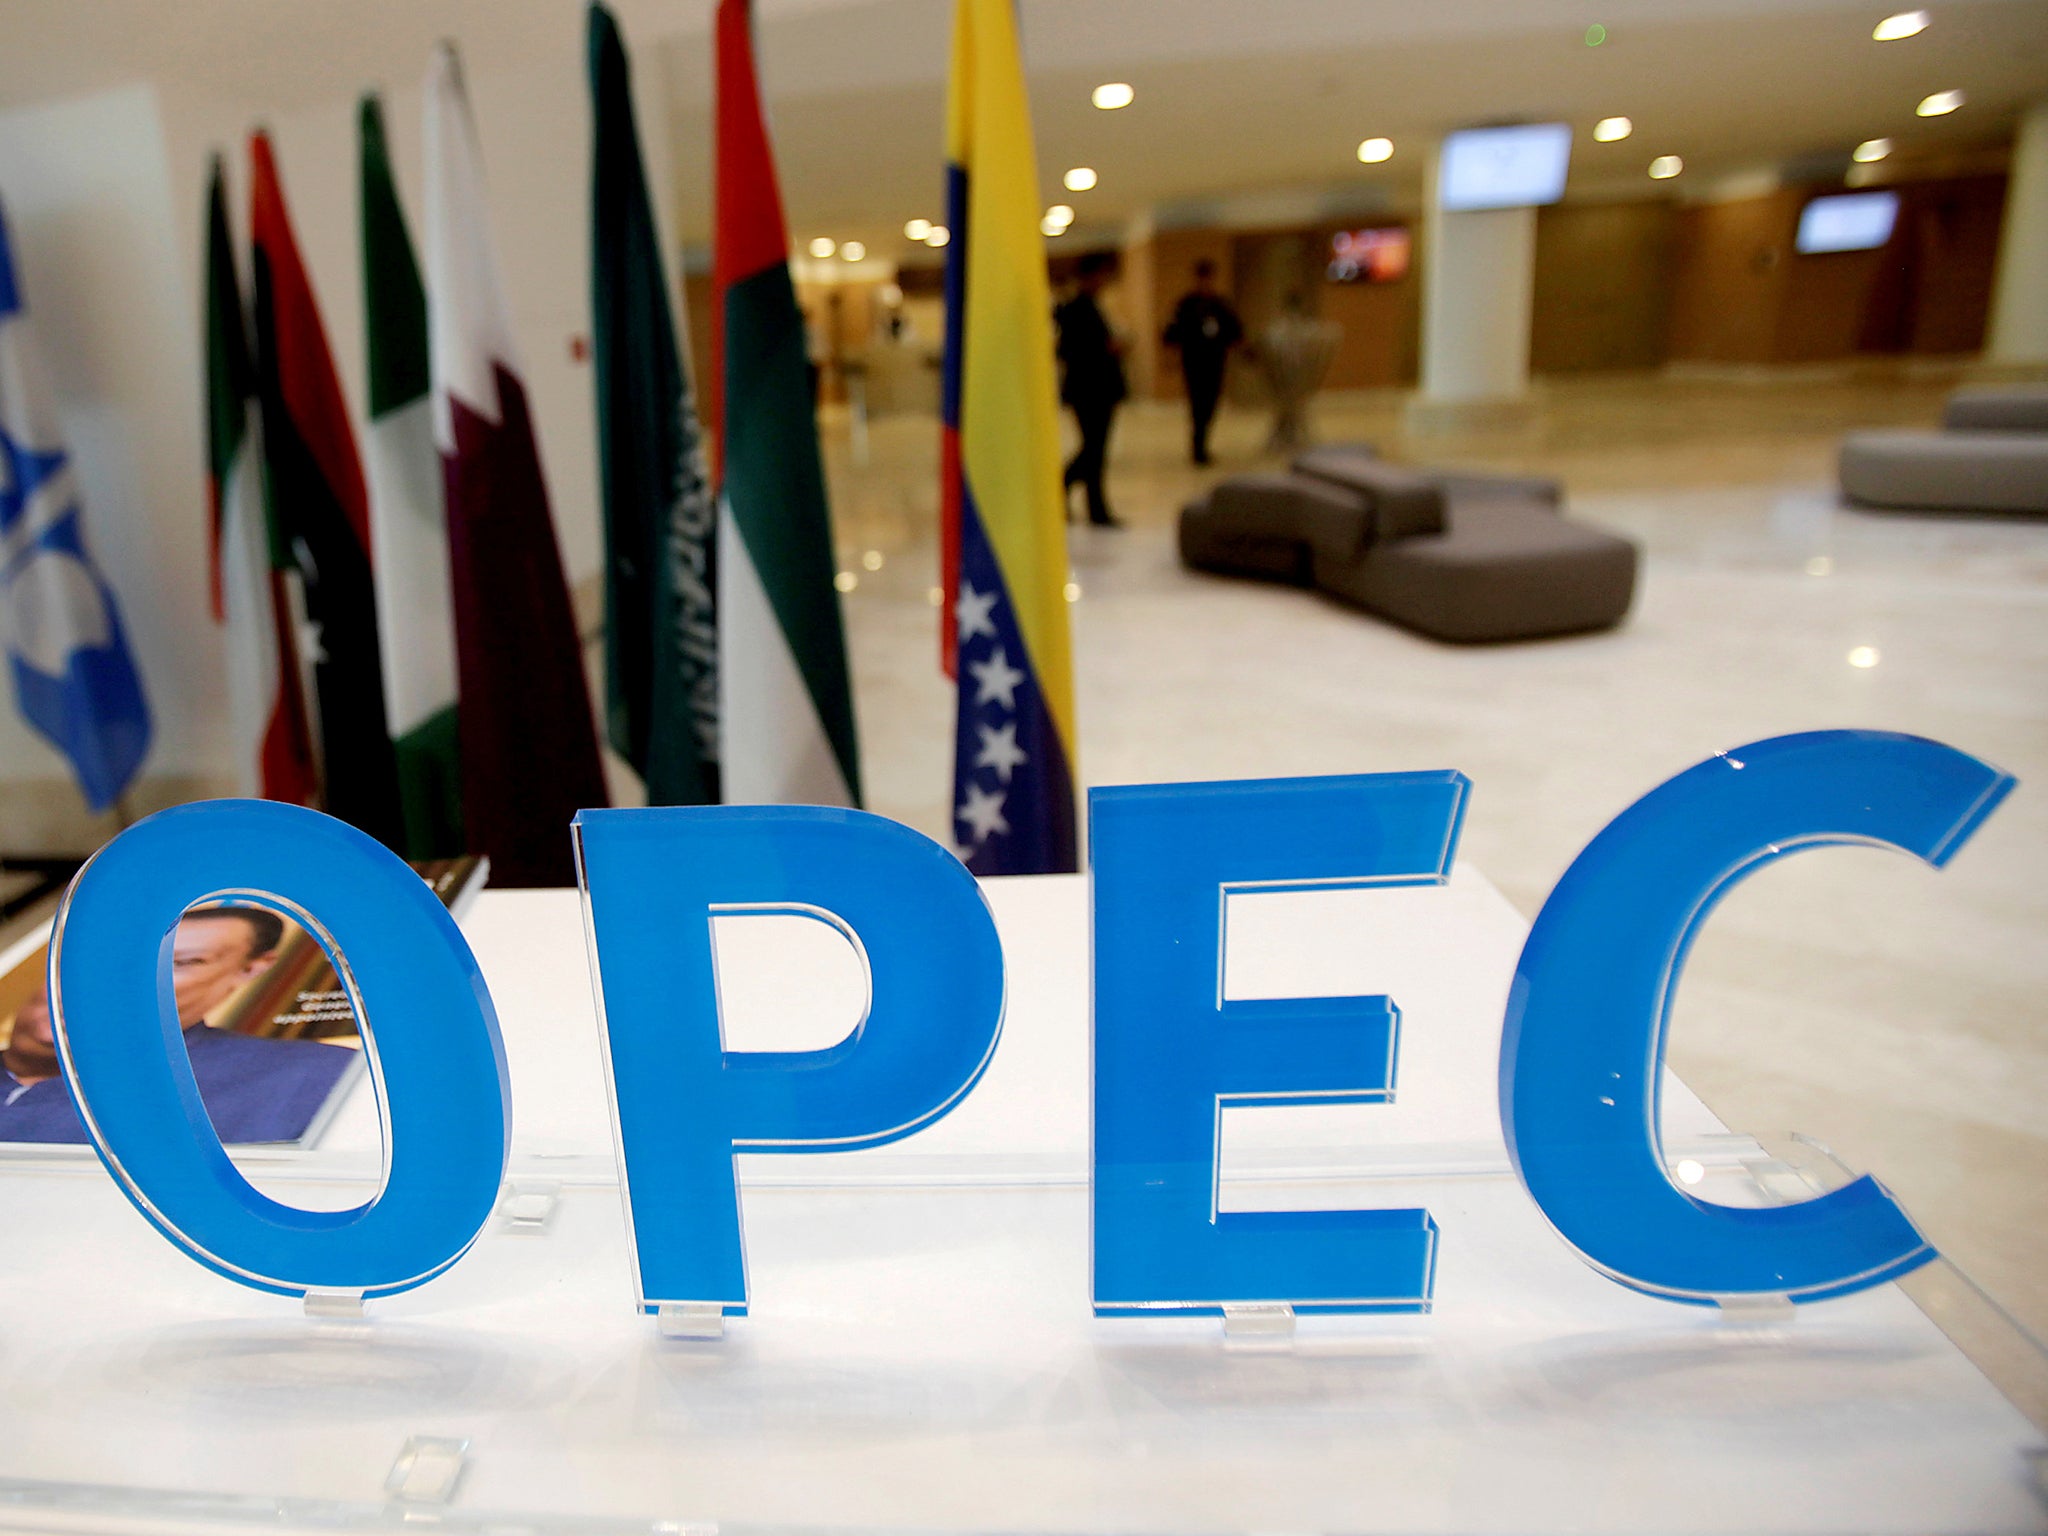 Opec has extended its production cuts